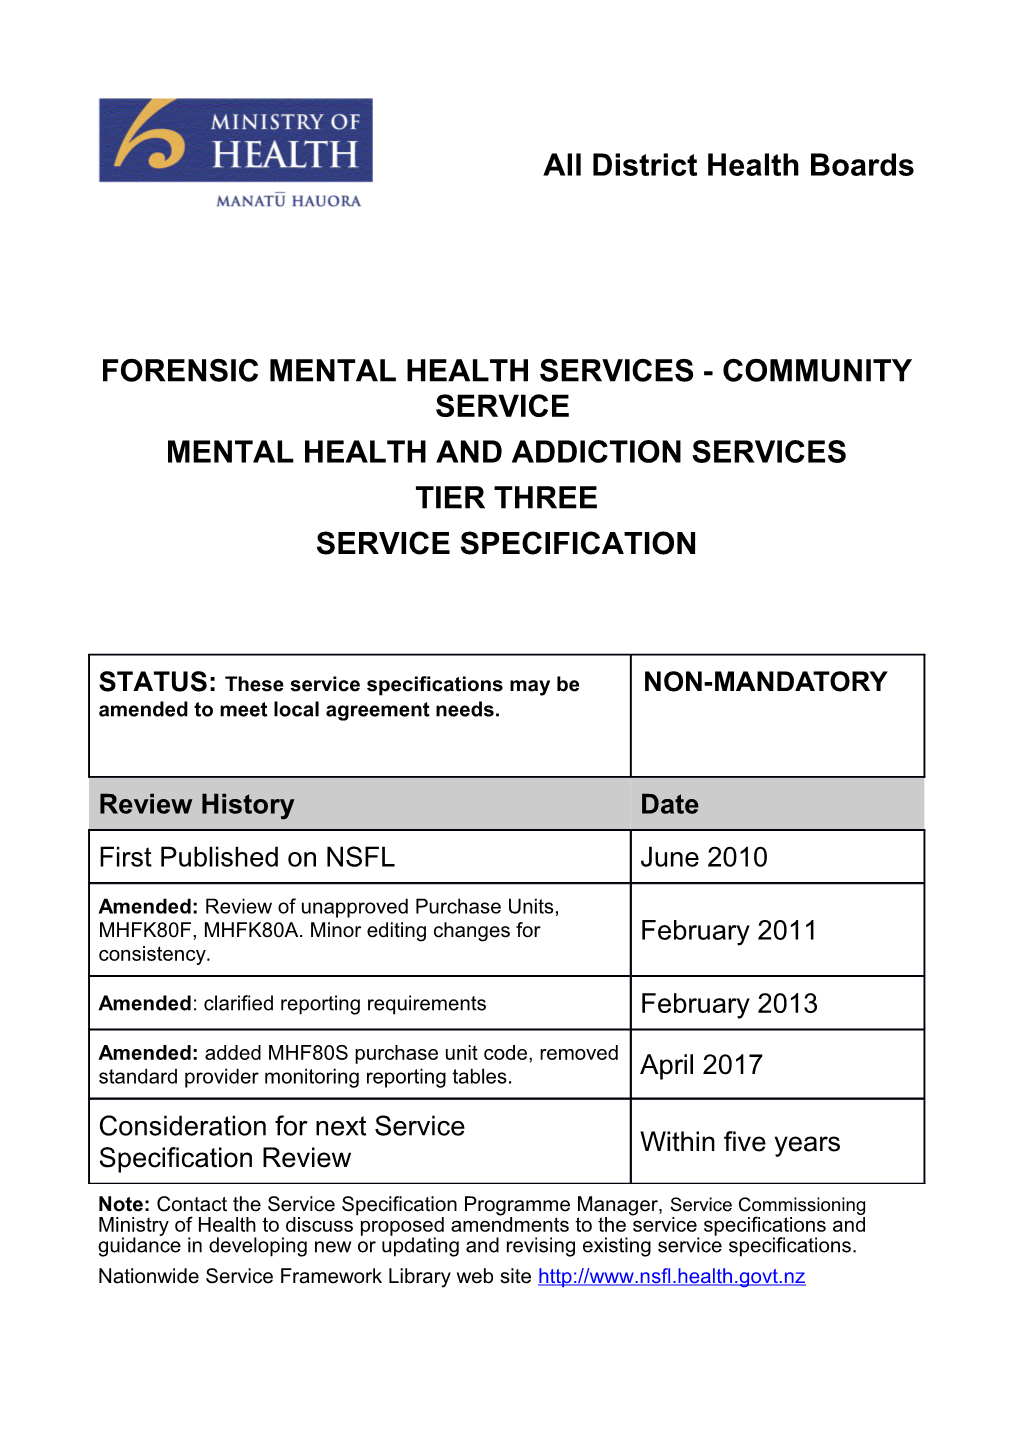 Forensic Mental Health Services - Community Service